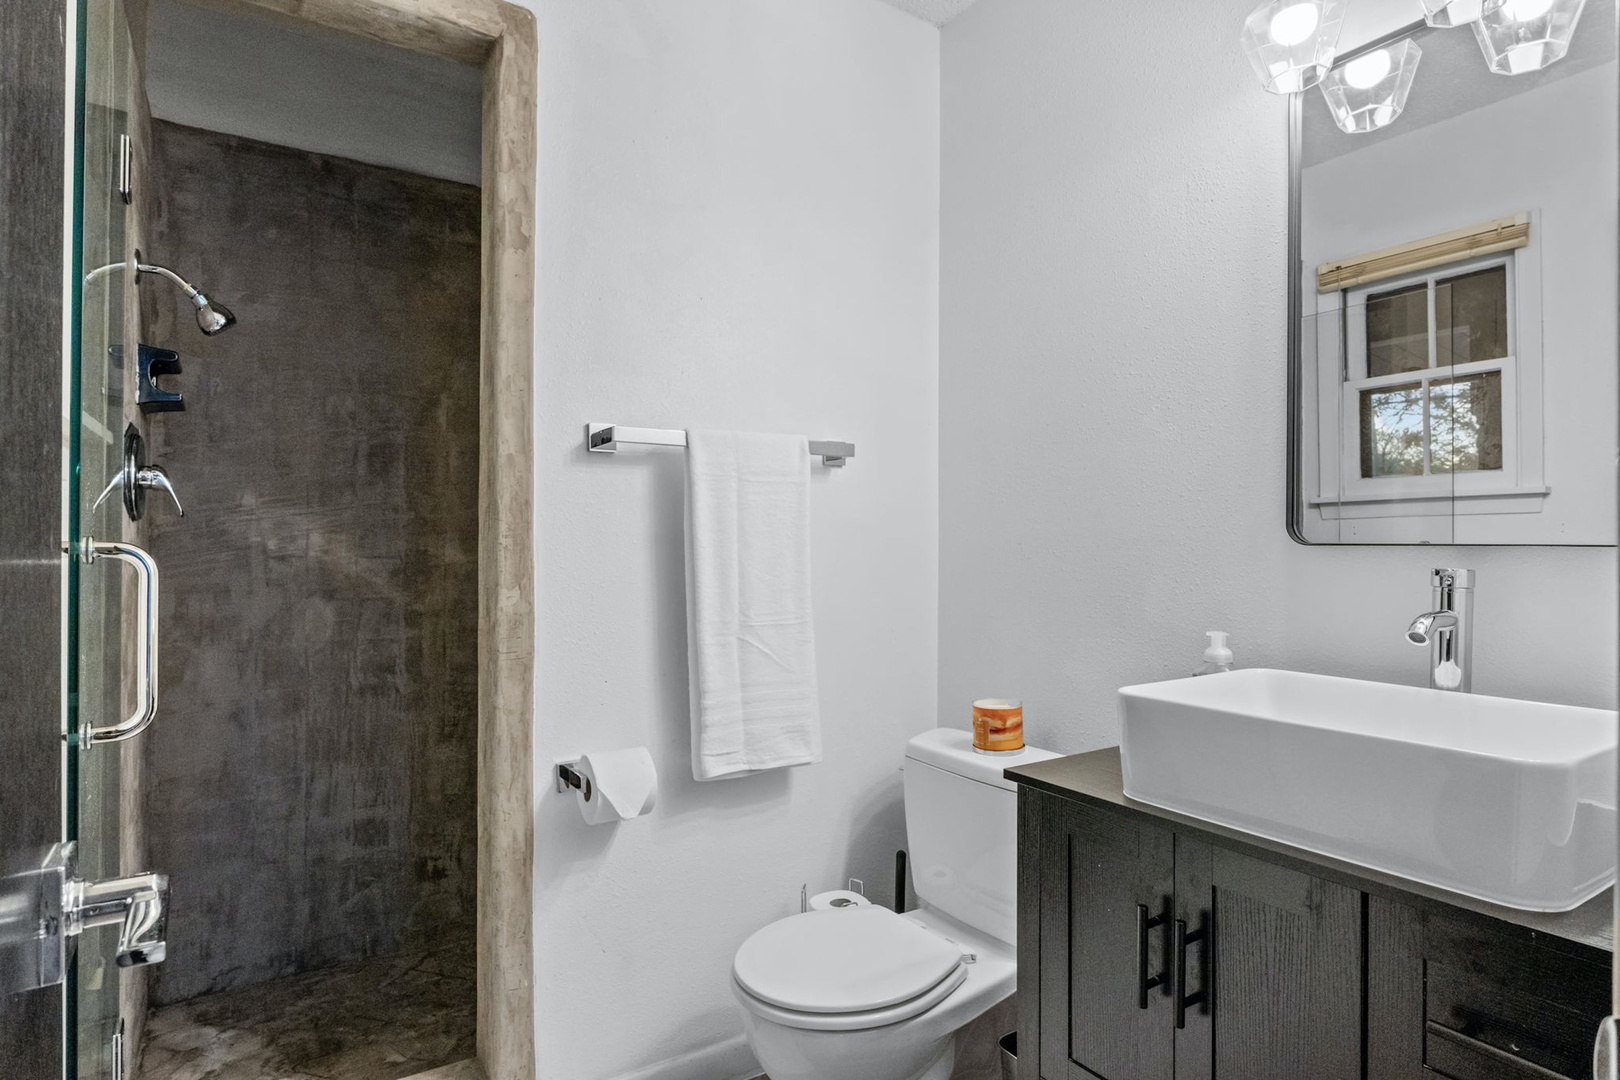 This private ensuite offers a single vanity & walk-in shower